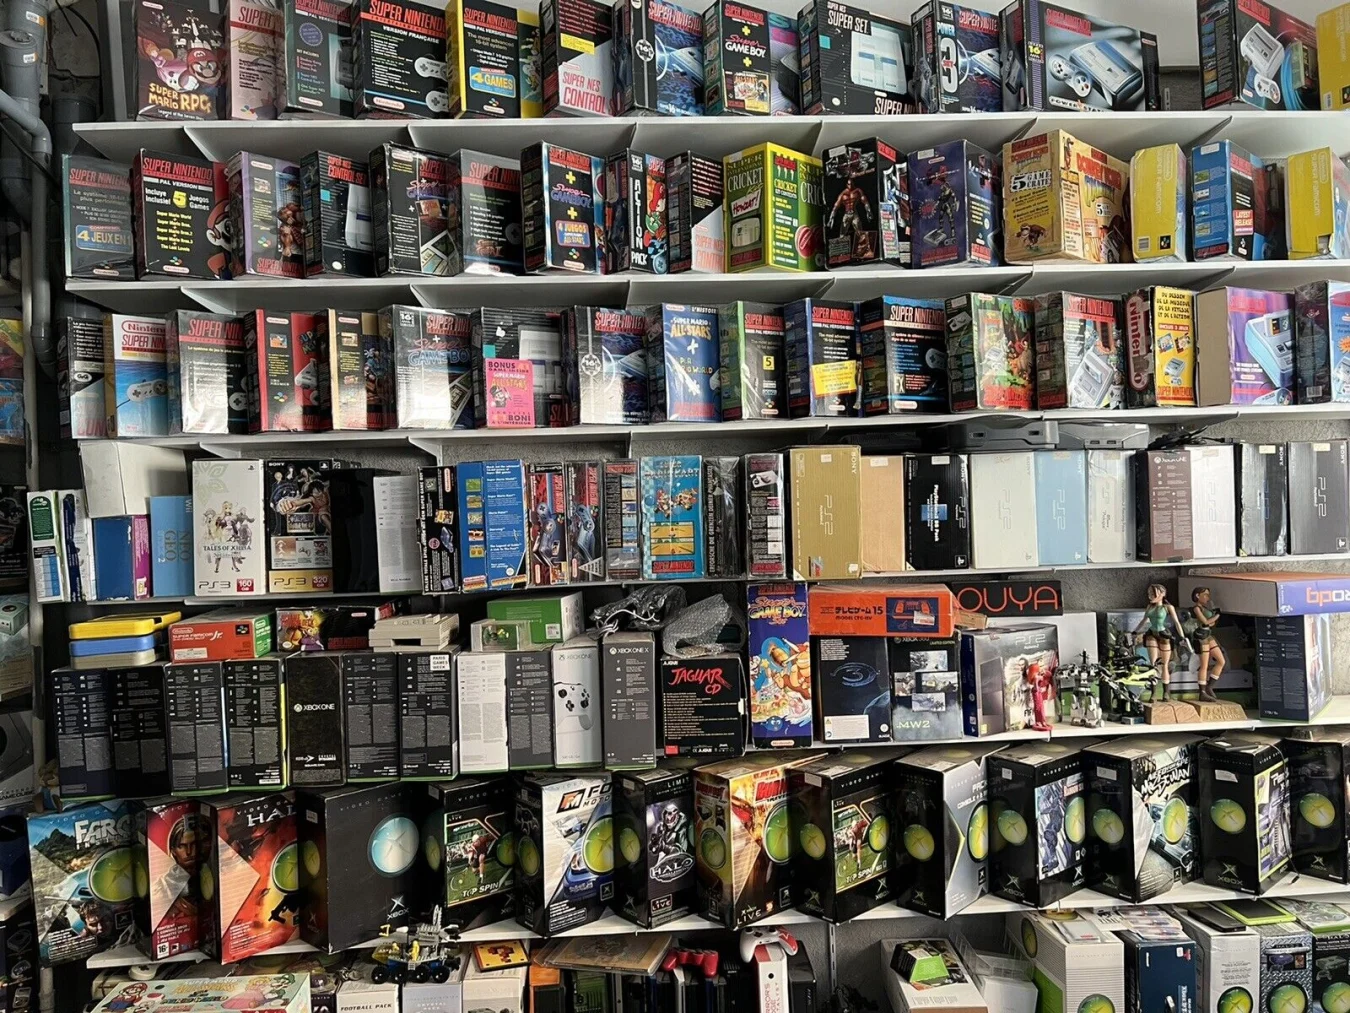 Collection of video game consoles, including Nintendo and Xbox products.